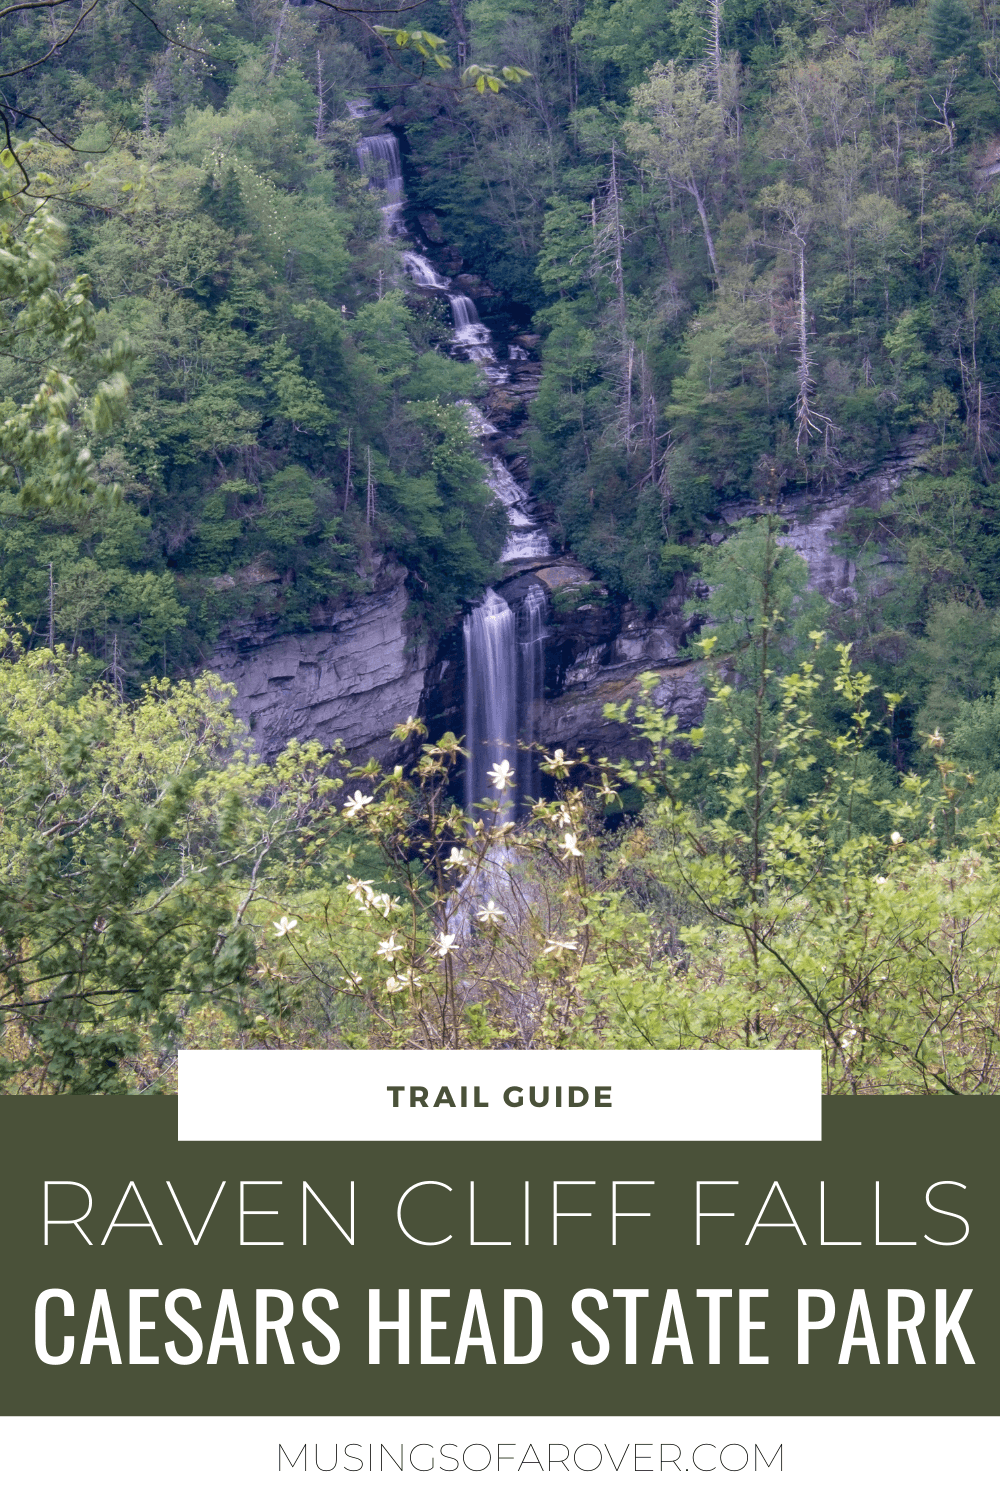 Want to visit one of the tallest waterfalls in South Carolina? Raven Cliff Falls in Caesars Head State Park is where you want to go. And the hike to the overlook is relatively short, flat, and dog friendly. But it is popular. Find out what you need to know!